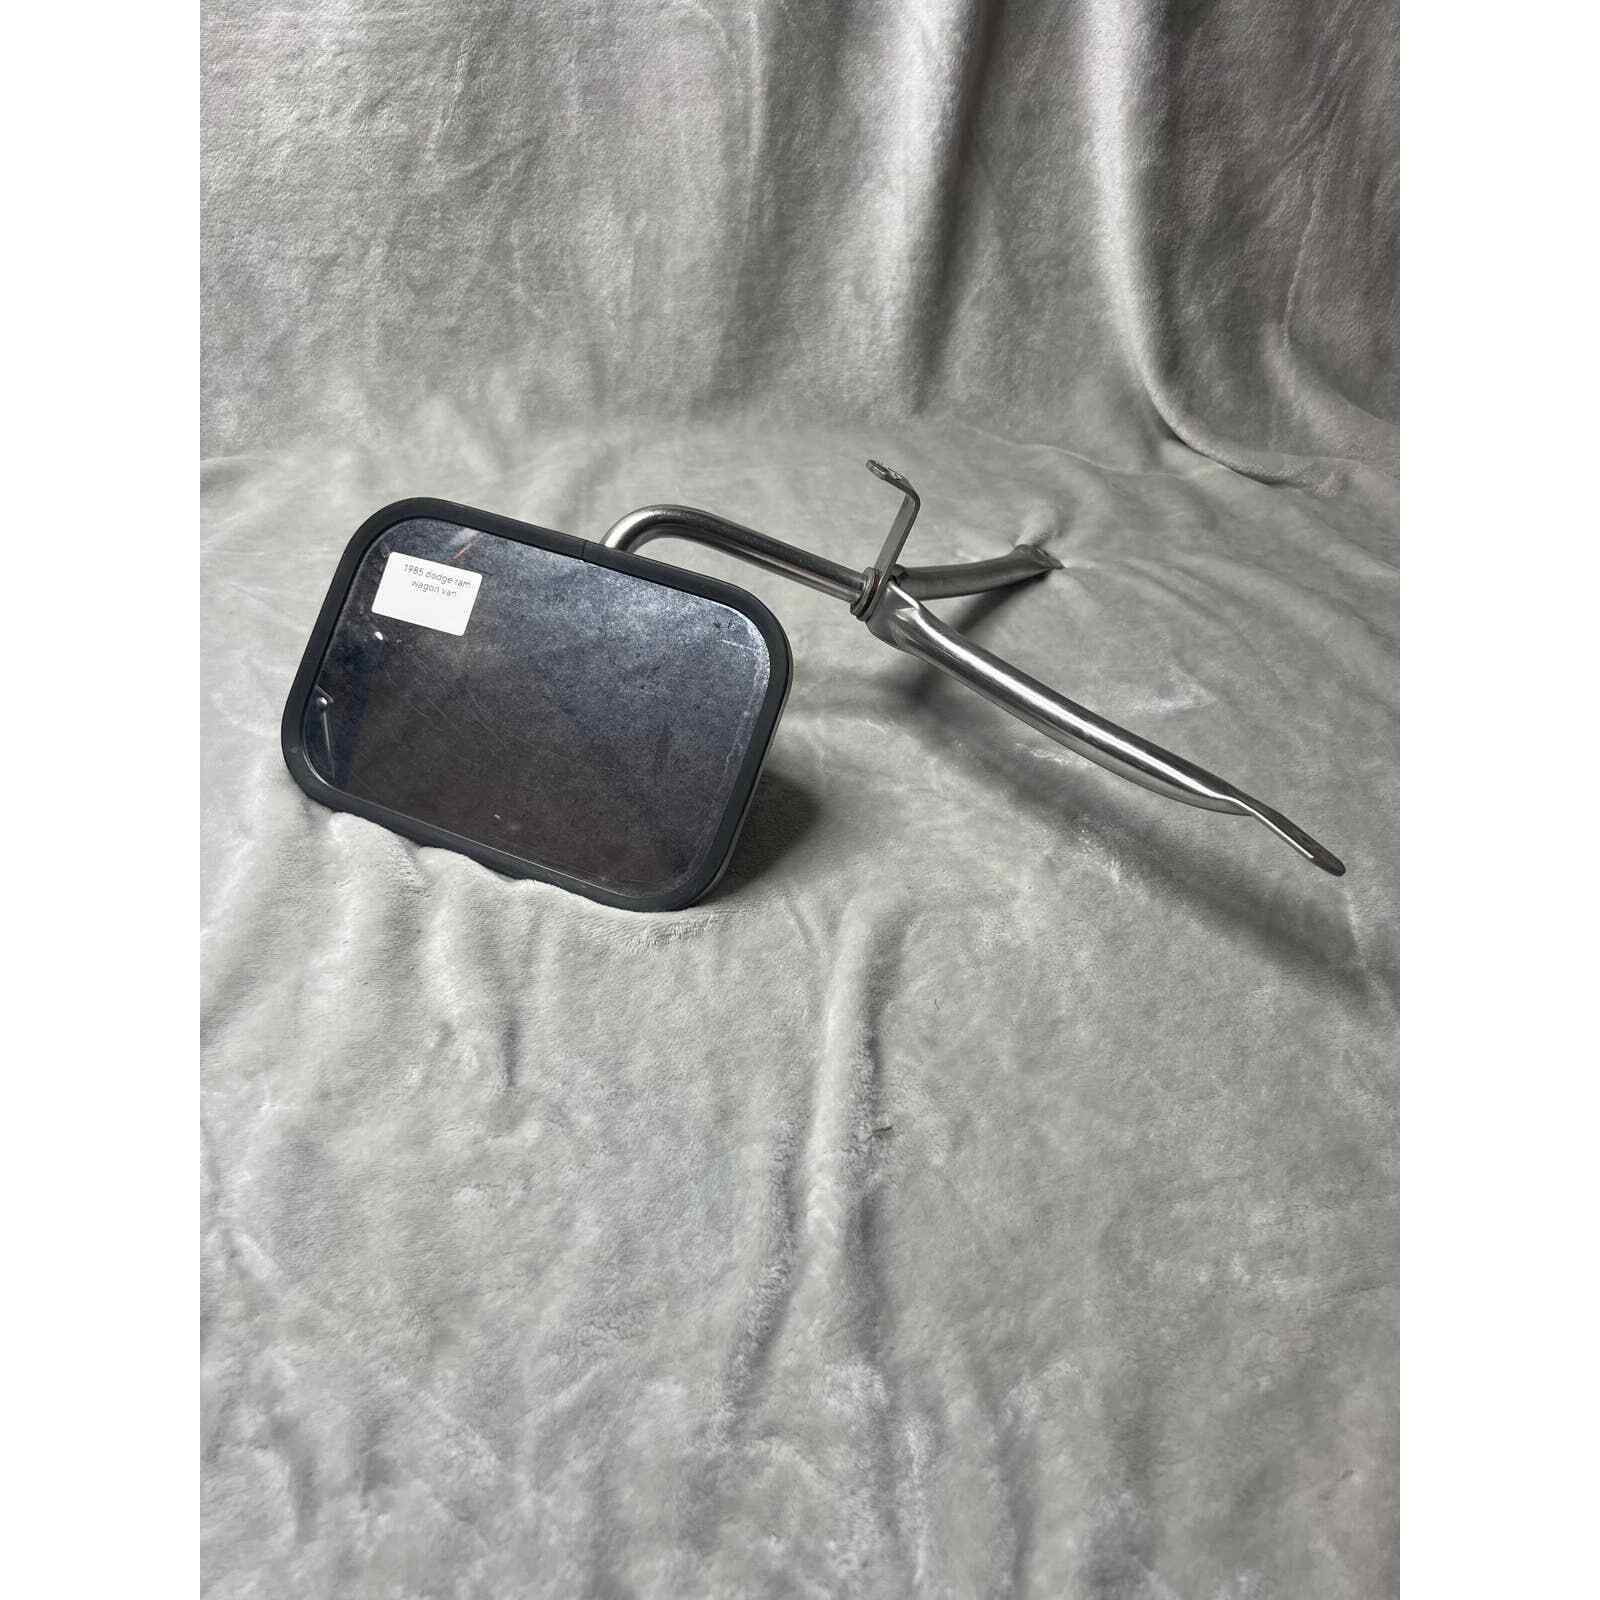 1982-1987 Dodge Ram Wagon OE Driver Side View Mirror Towing Swing Away 3 Point